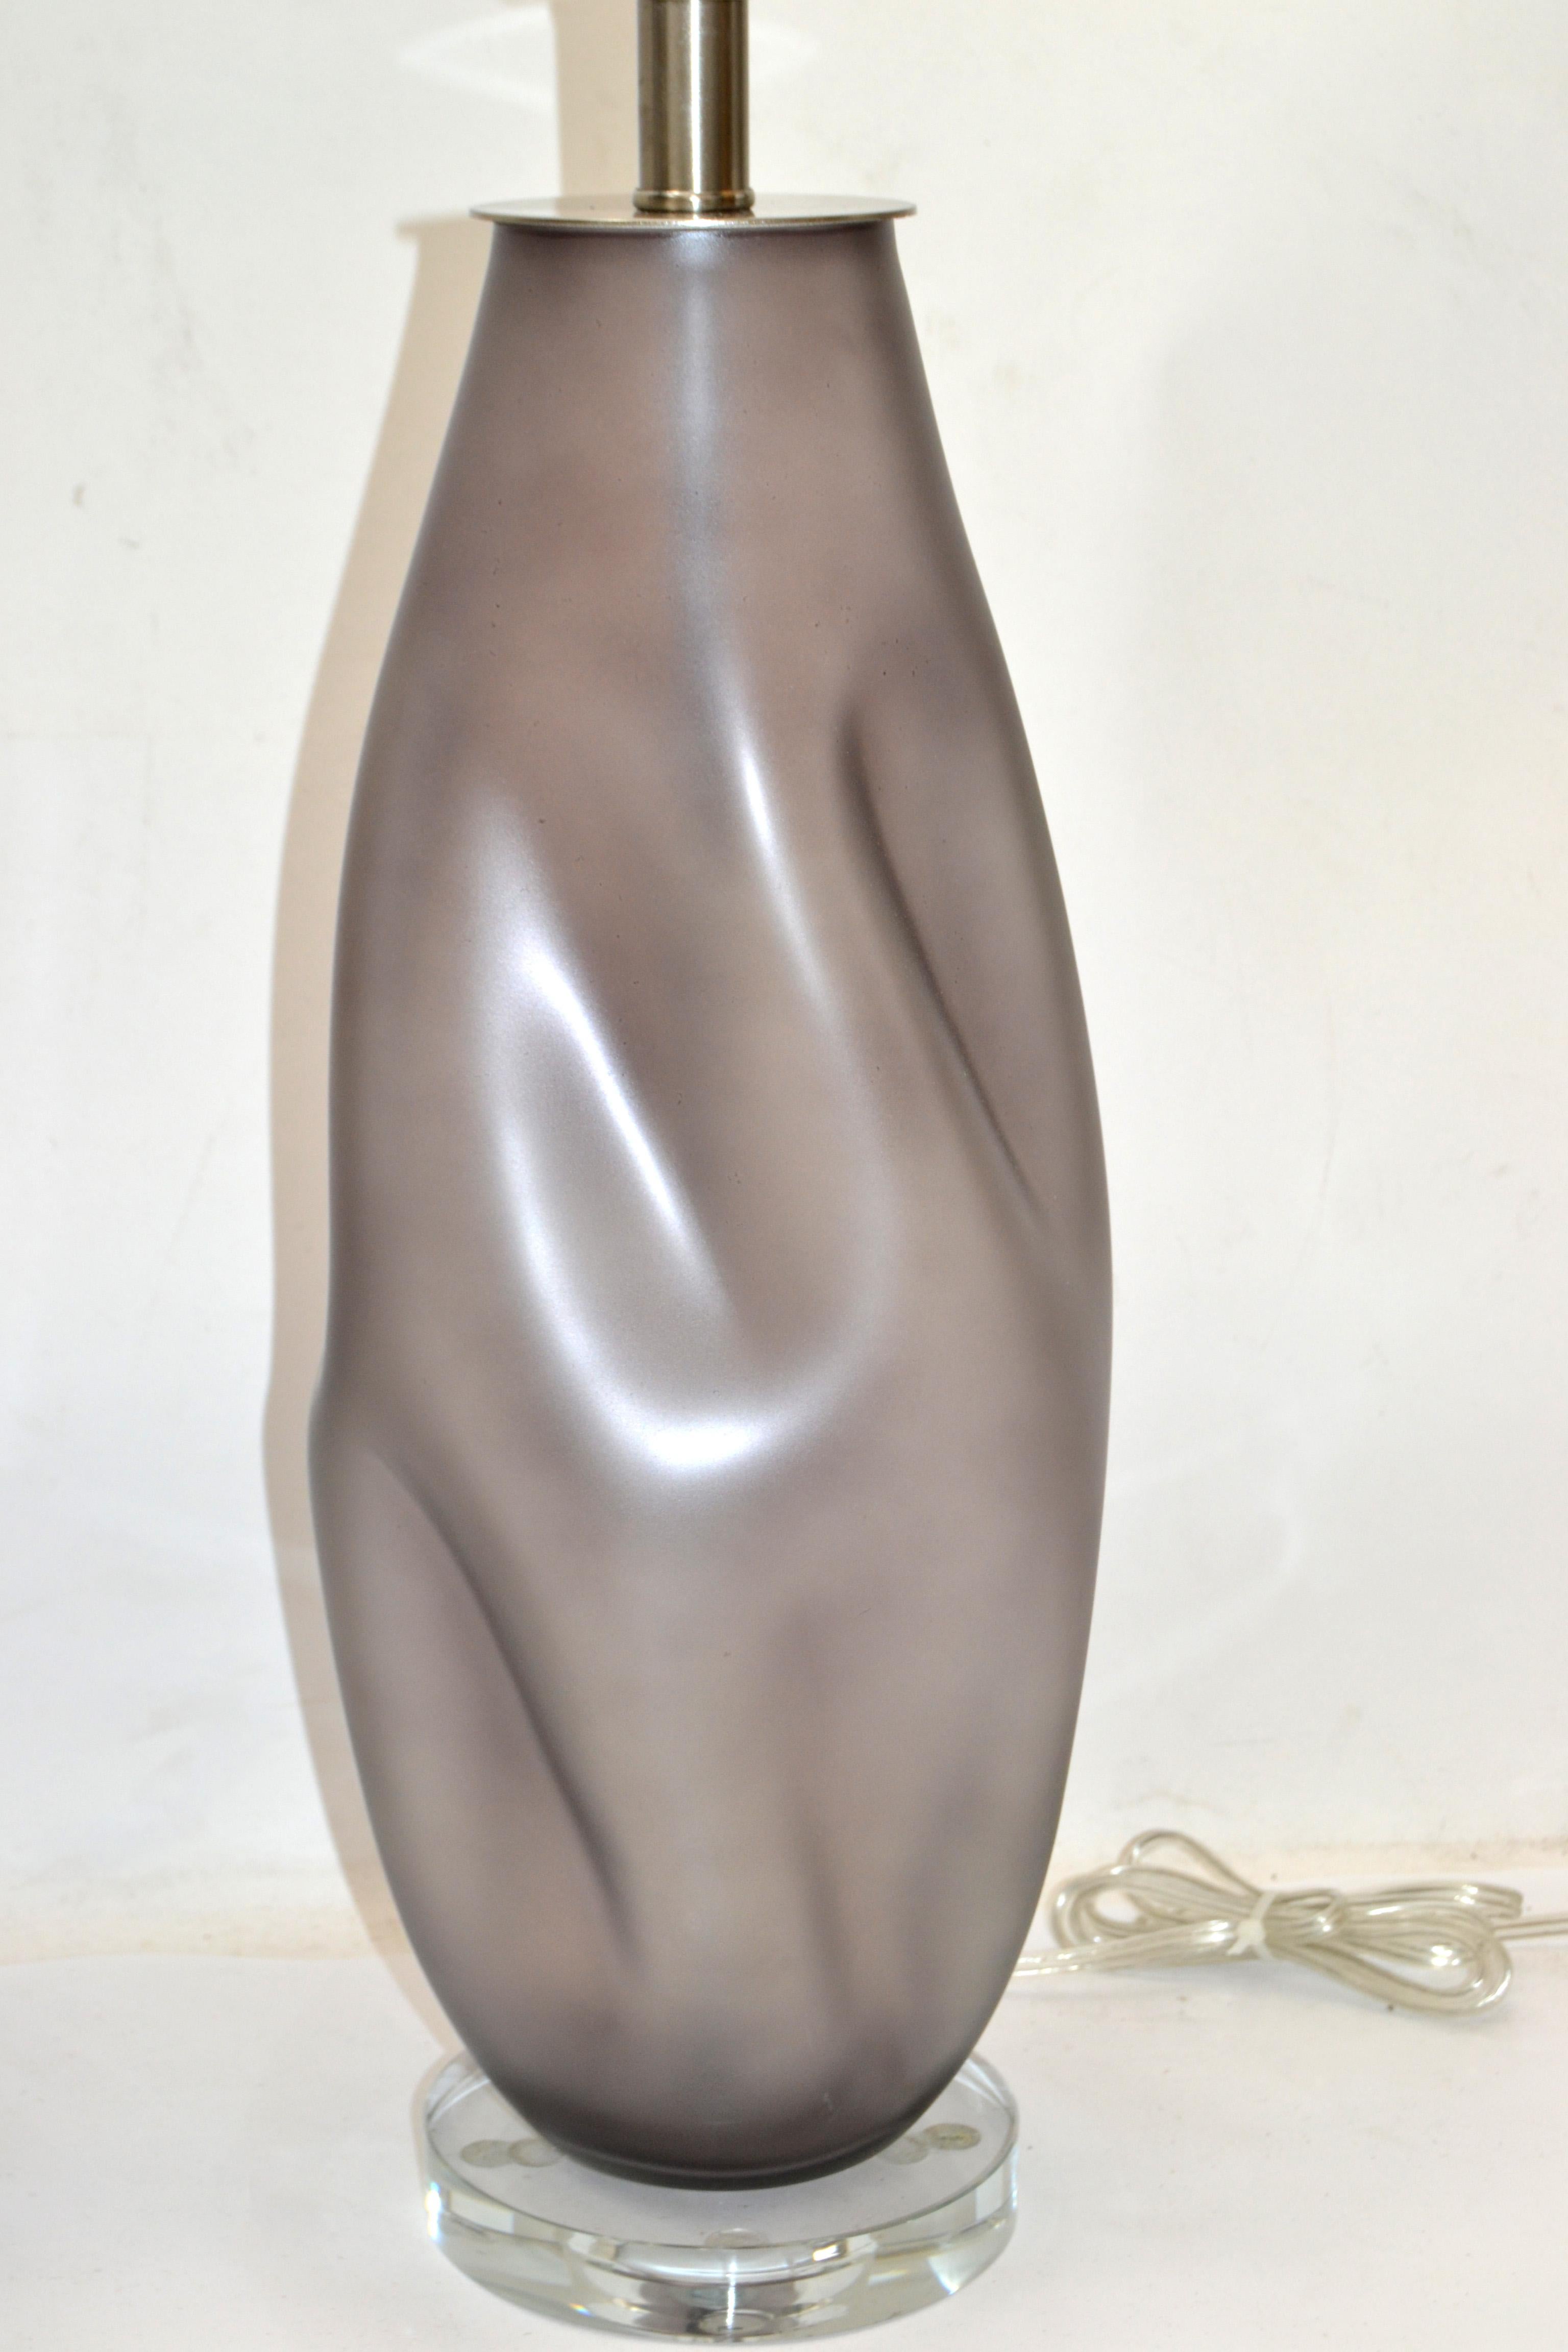 Blenko Mid-Century Modern Gray Blown Art Glass Table Lamps Acrylic Base, Pair In Good Condition For Sale In Miami, FL